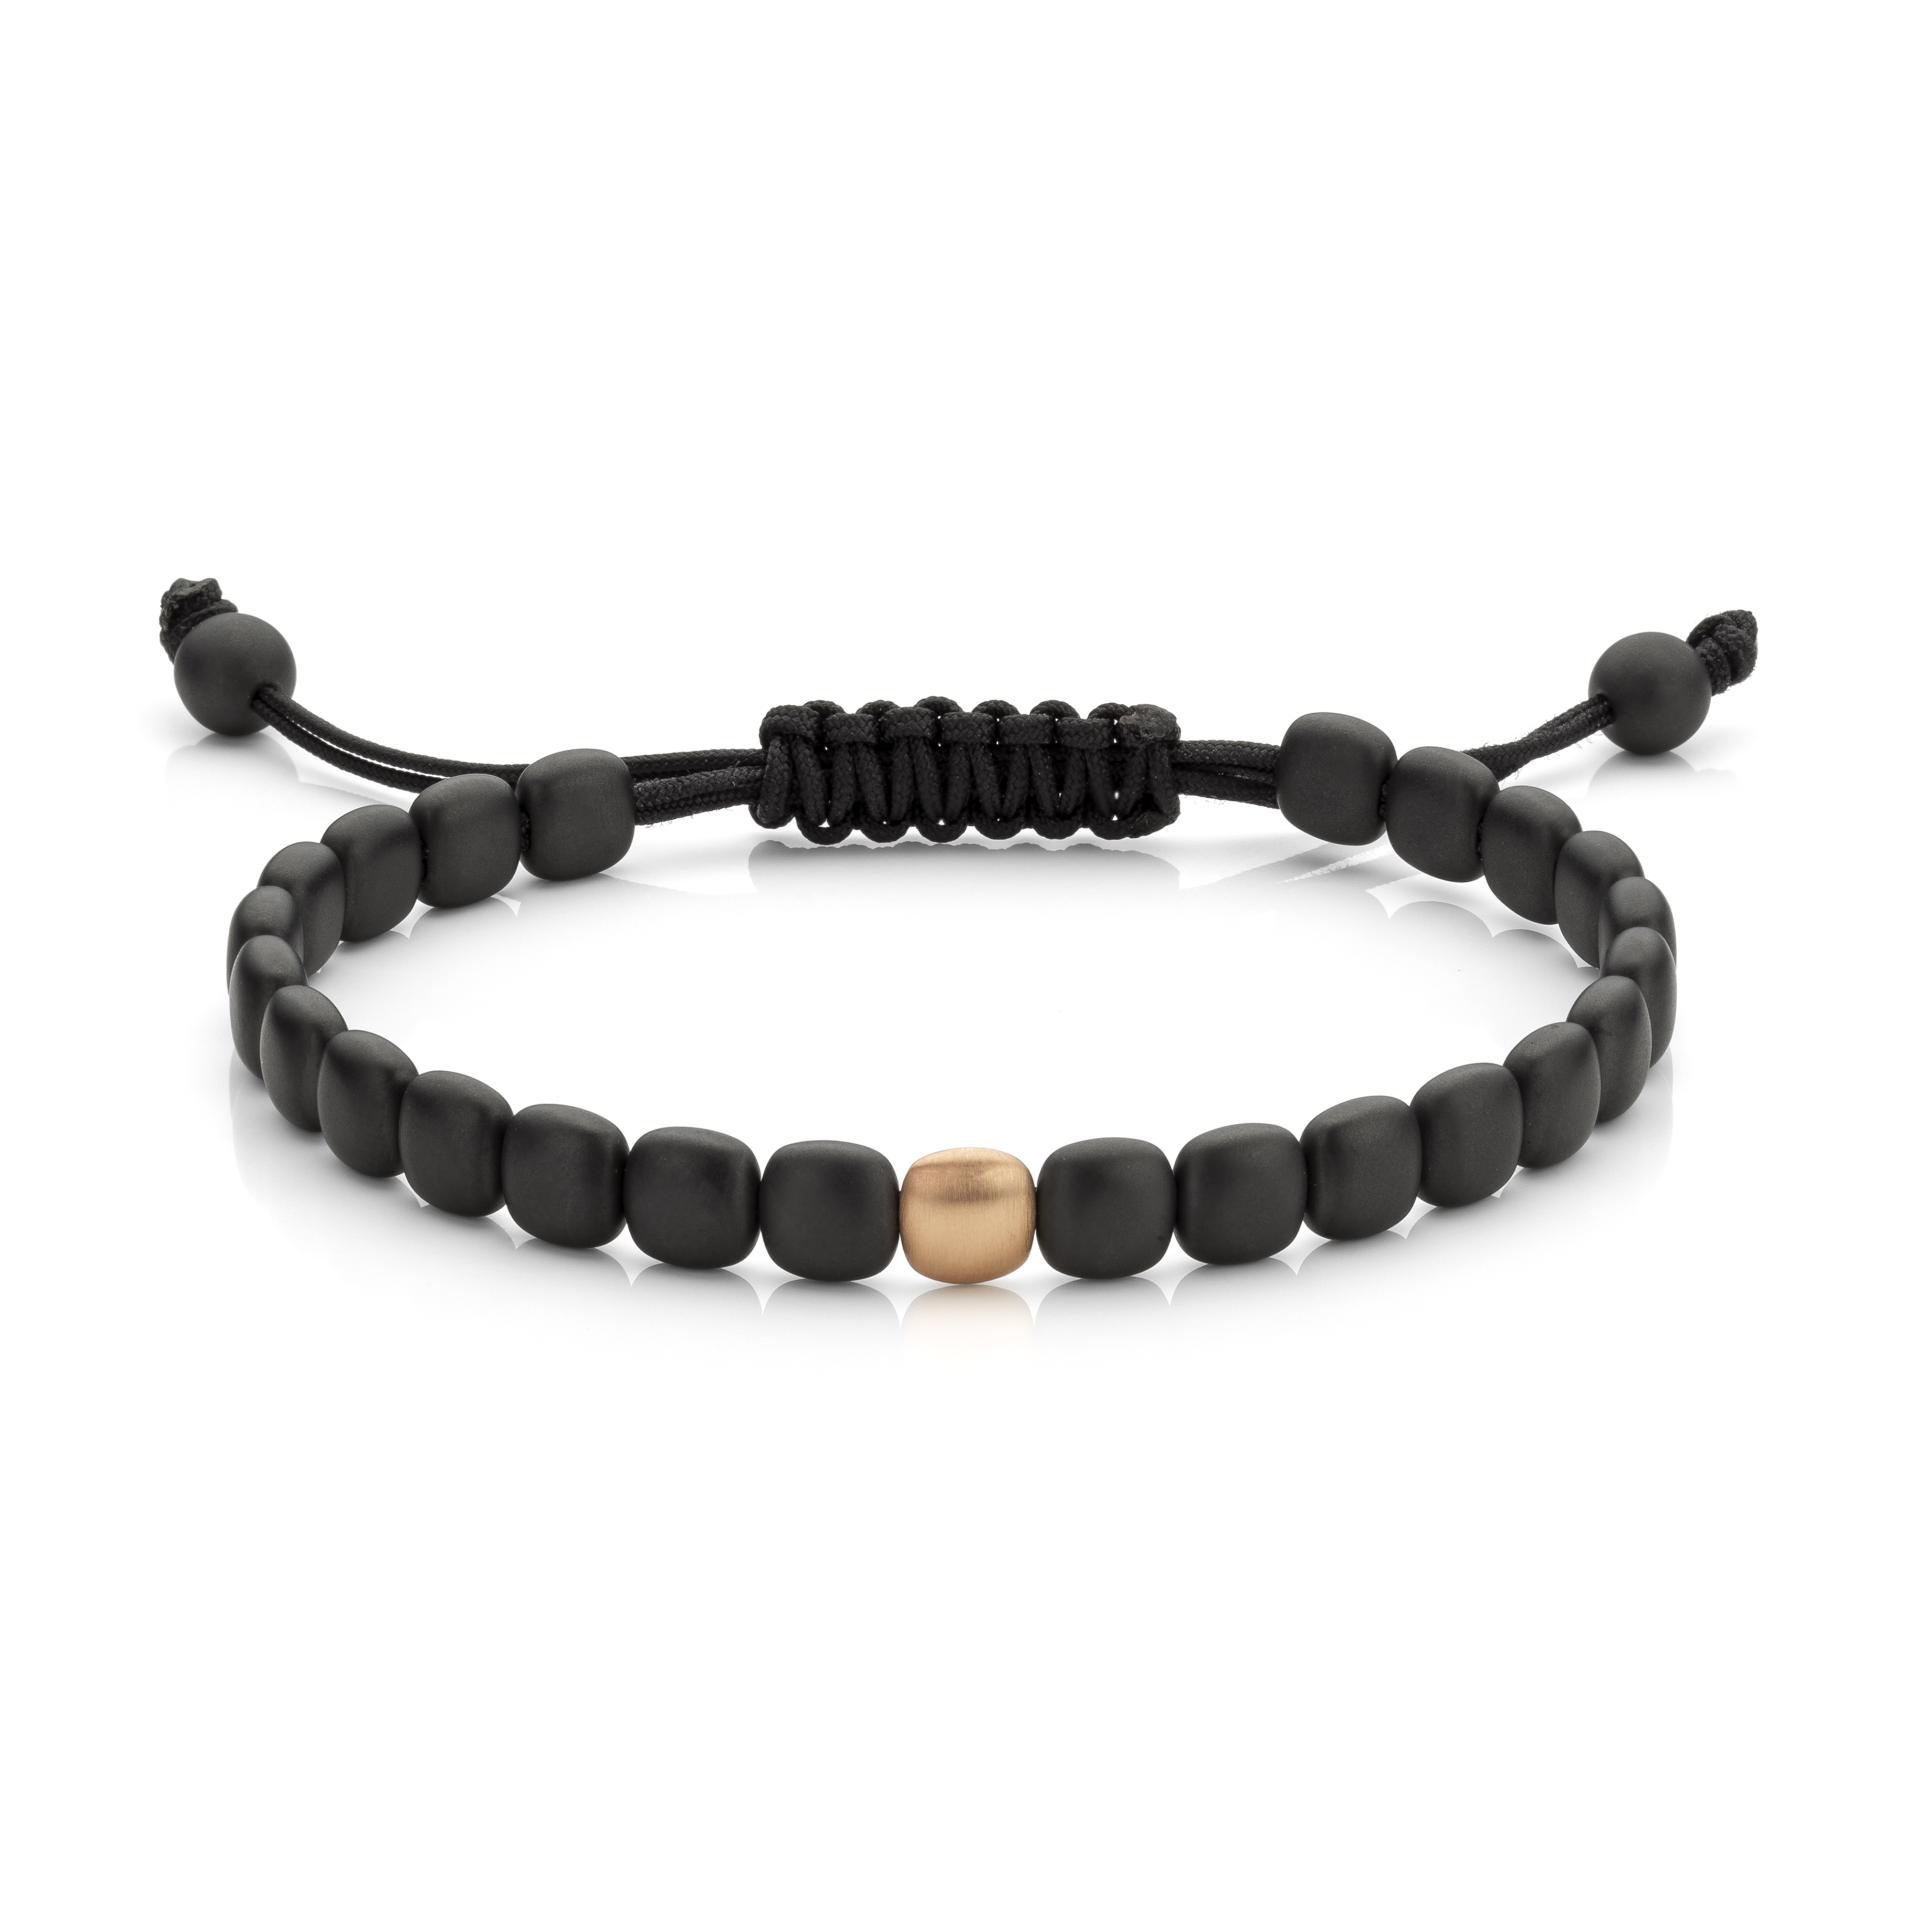 Bracelet in black ceramic and rose gold
 made by Maison De Greef